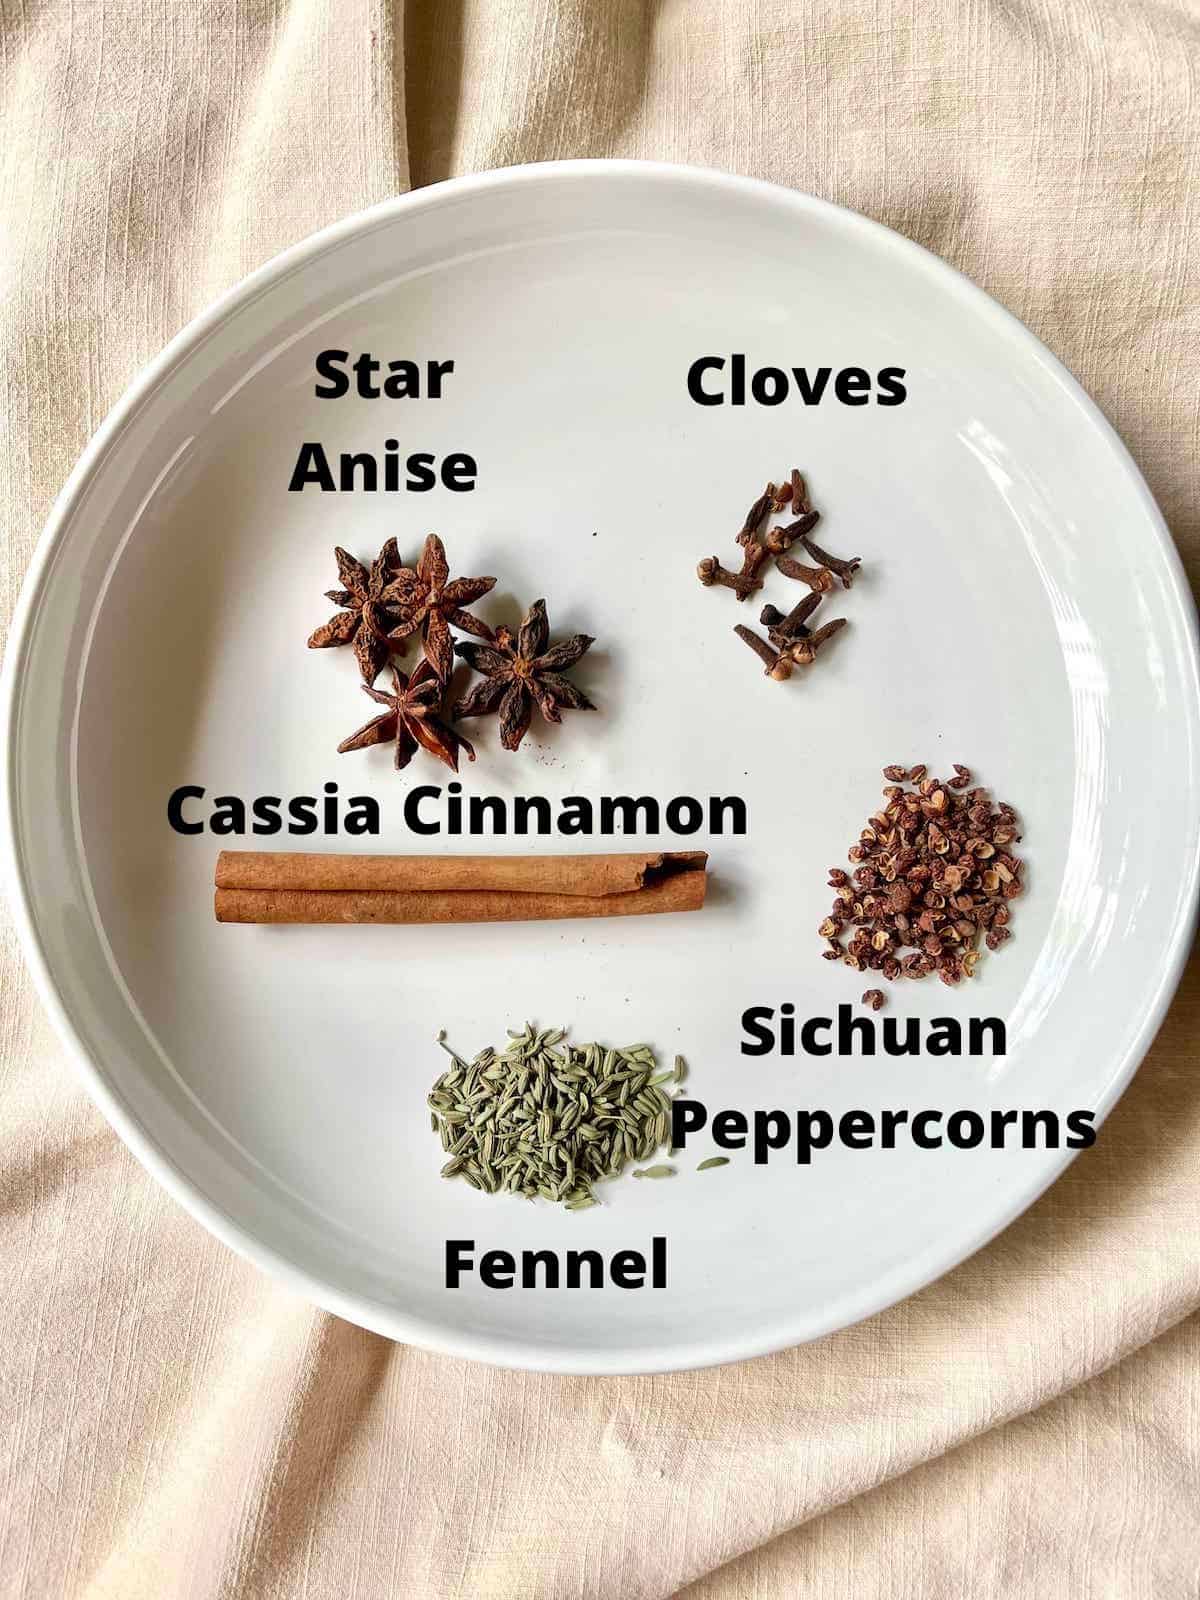 The 5 spices for Chinese 5 spice powder laid on a white plate.